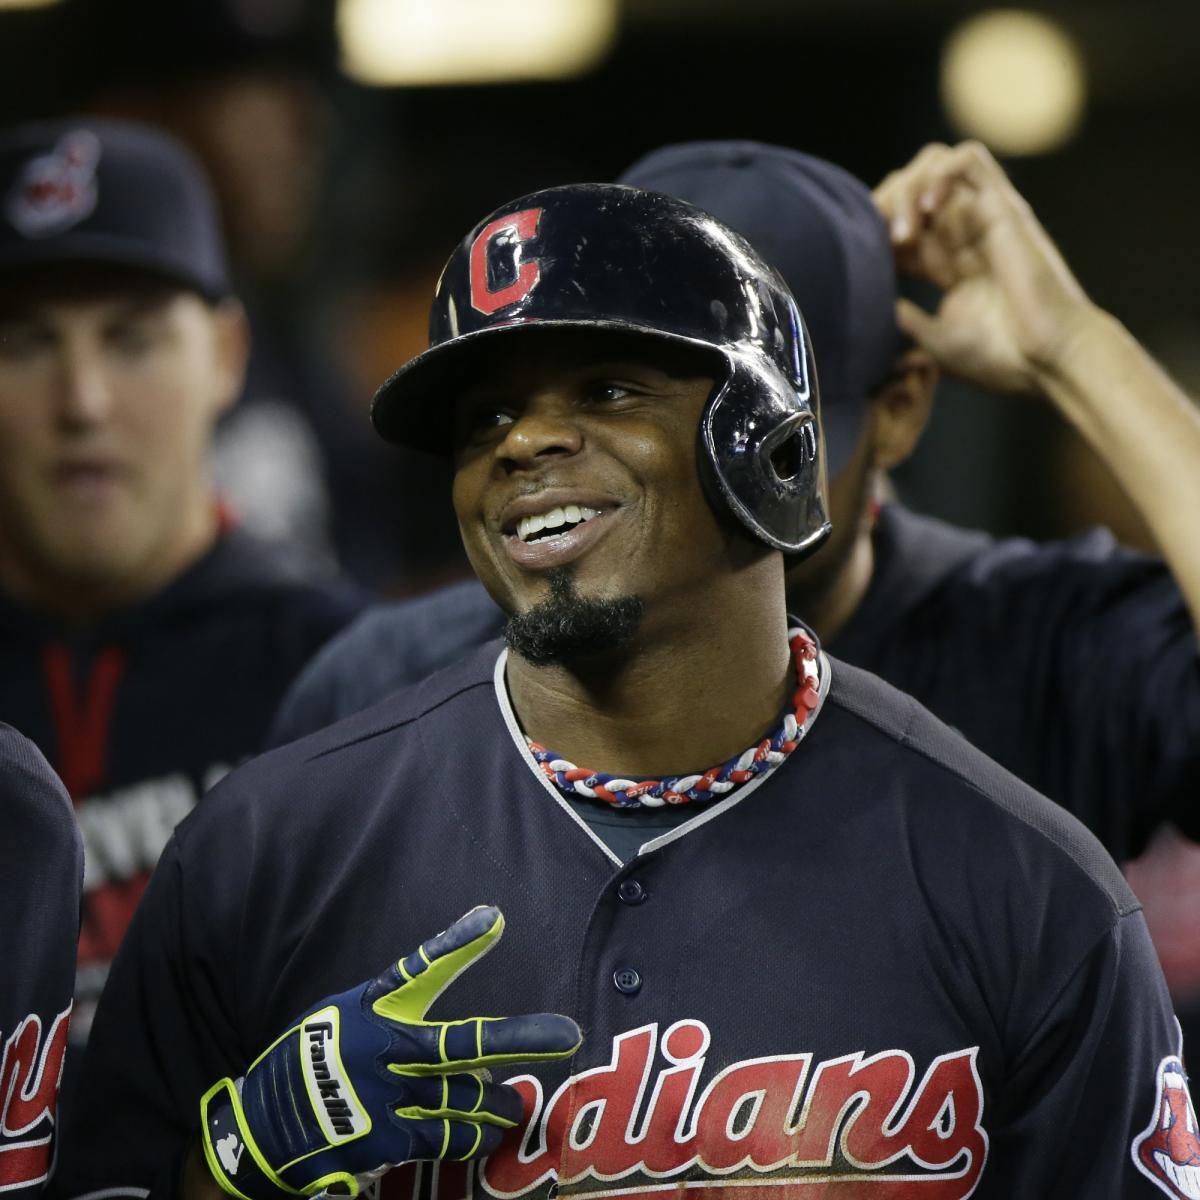 Rajai Davis awkwardly faceplanted into home plate but was somehow